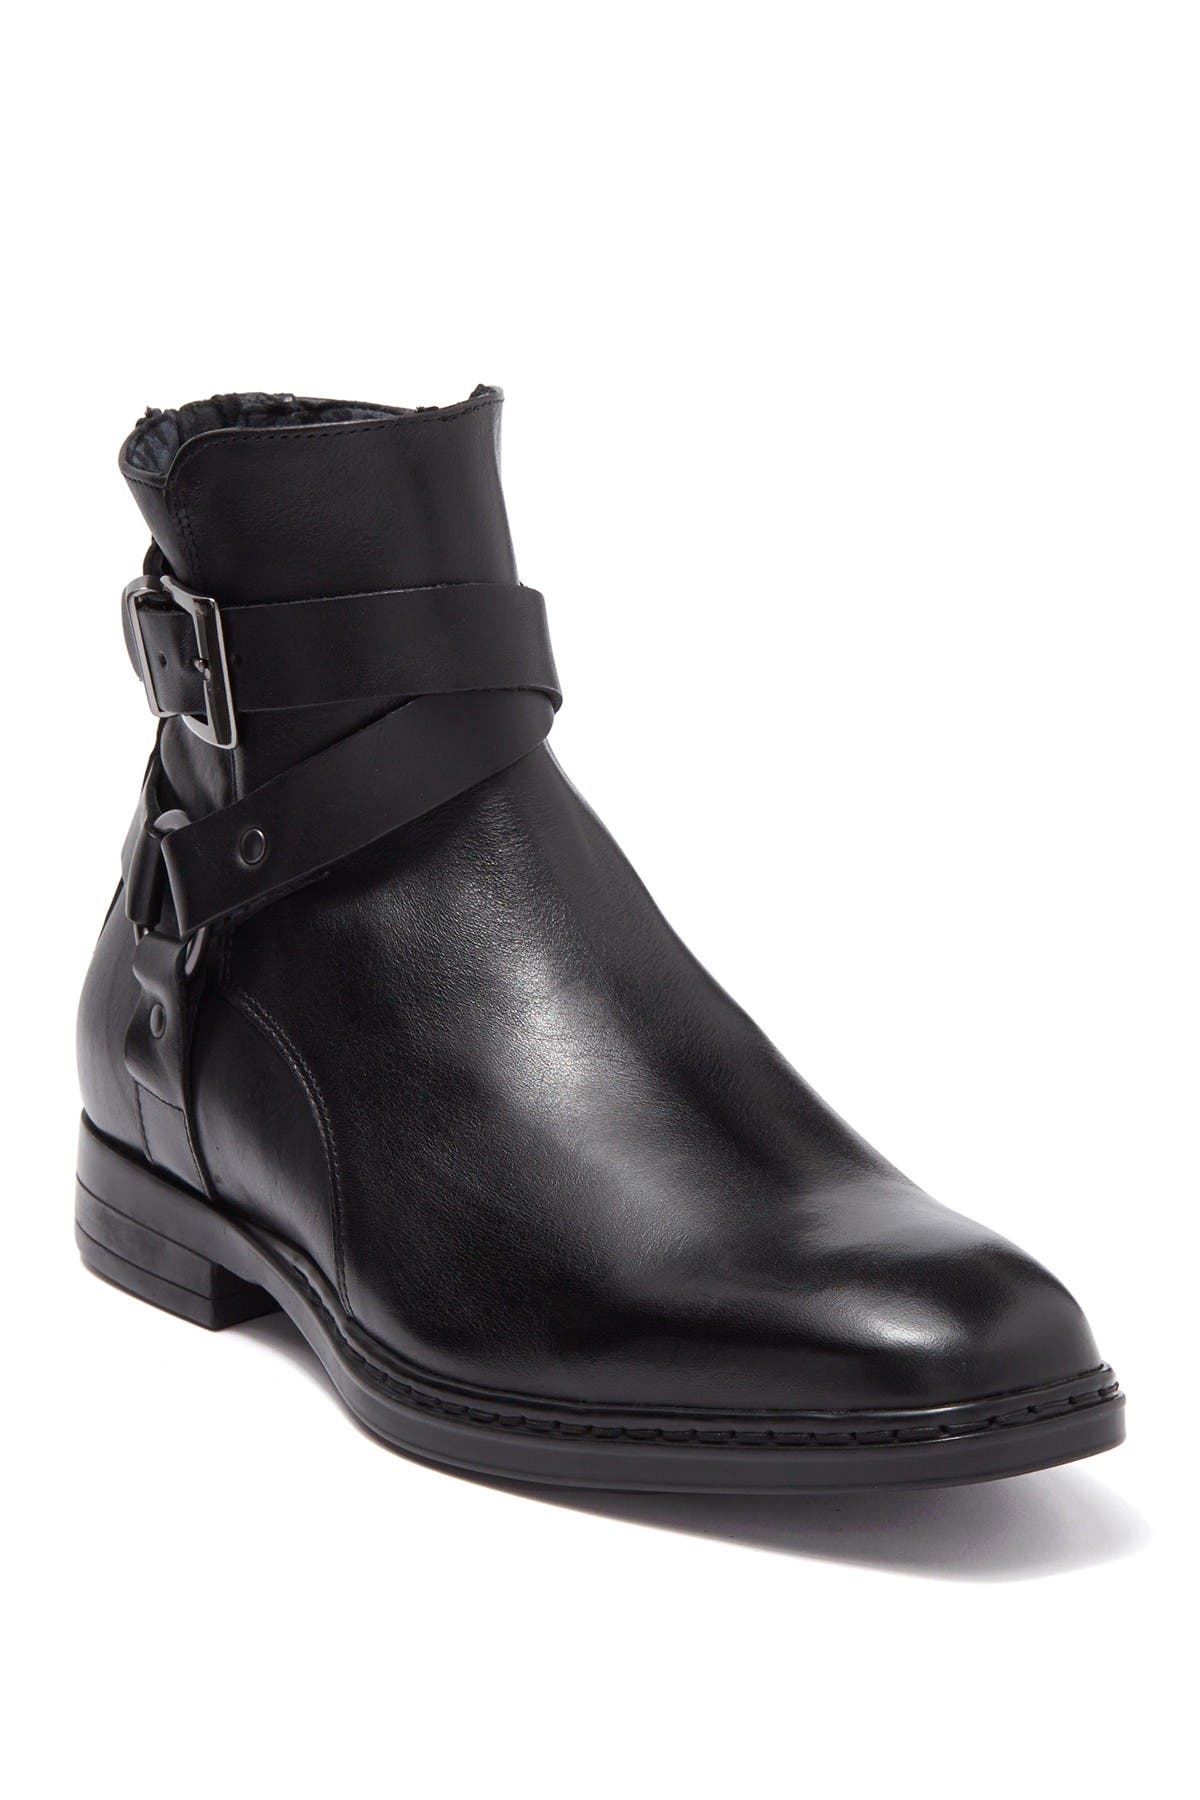 karl lagerfield boots